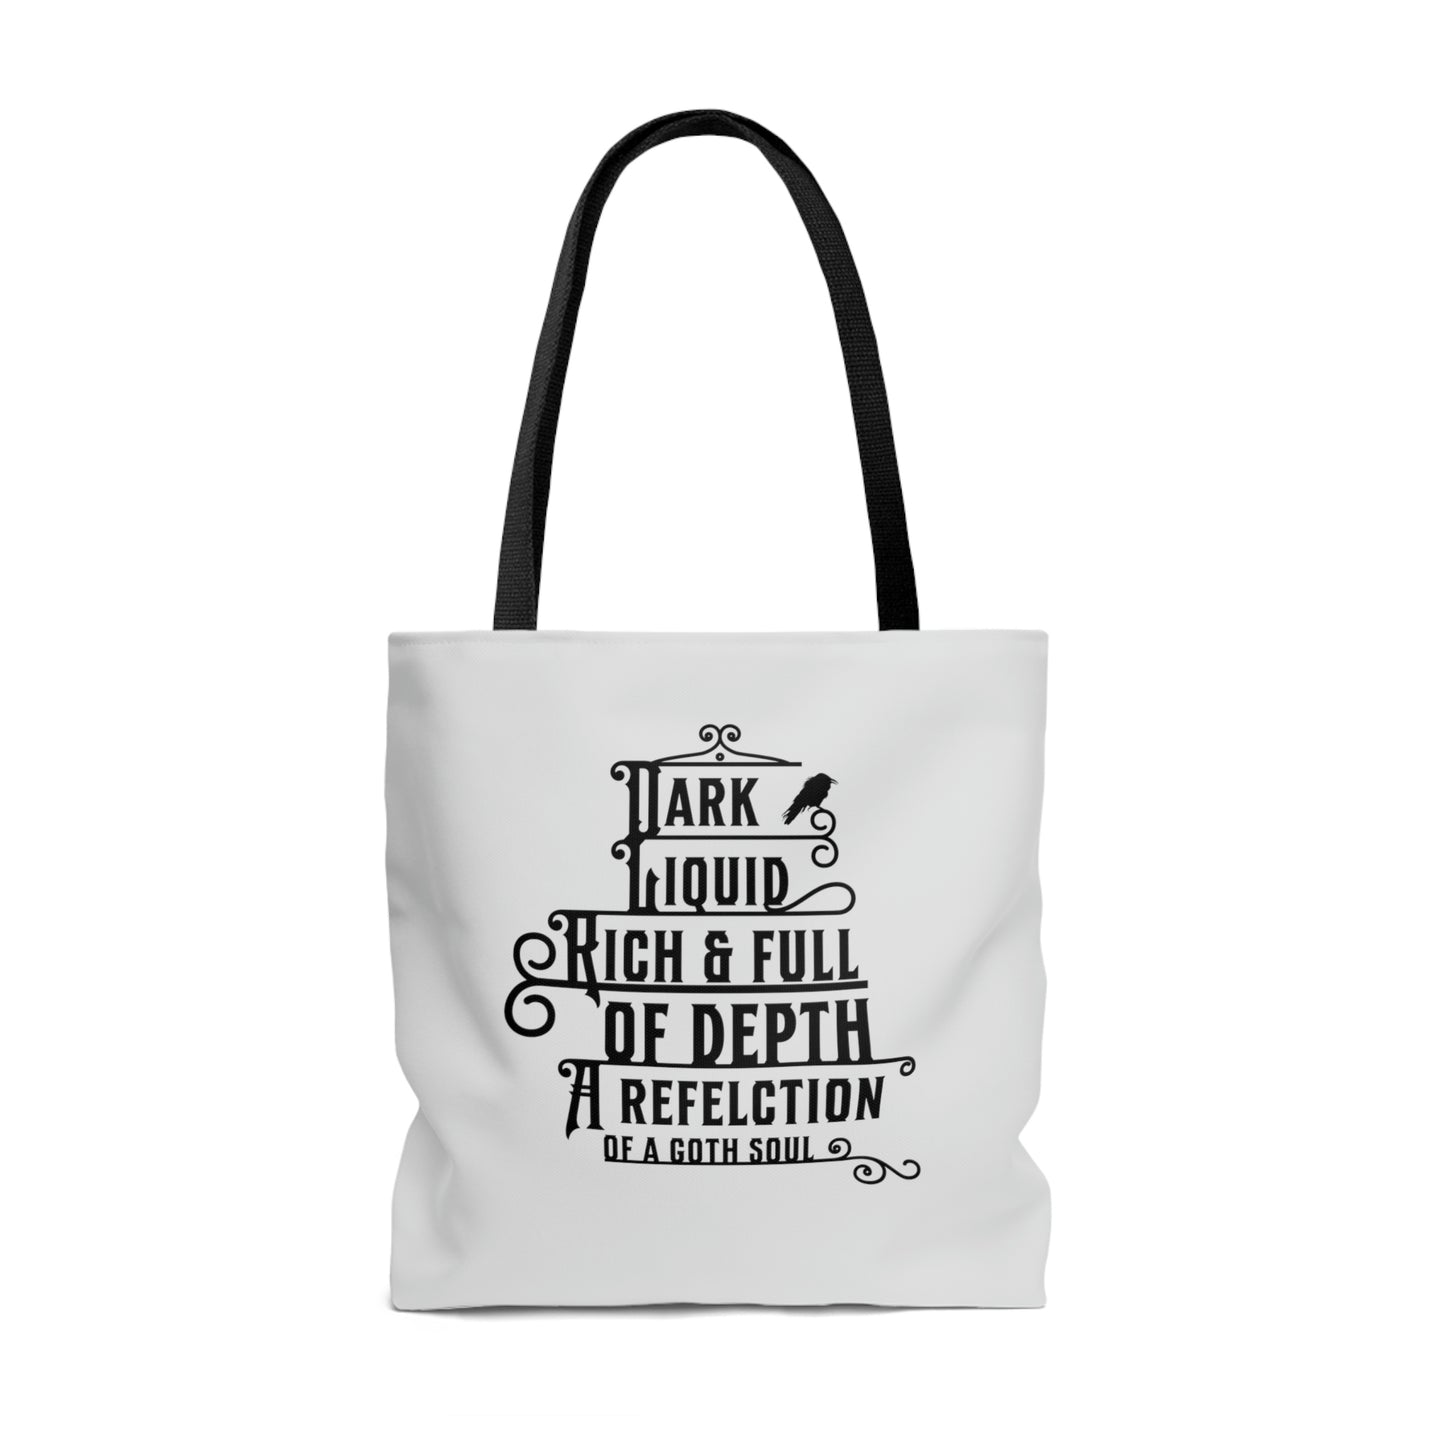 Minimalistic Goth Cat & Coffee Lovers Large Eco Tote Bag for Book Lovers, Dual Printed, Book Reader Gift Ideas - Light Grey Large Eco Tote